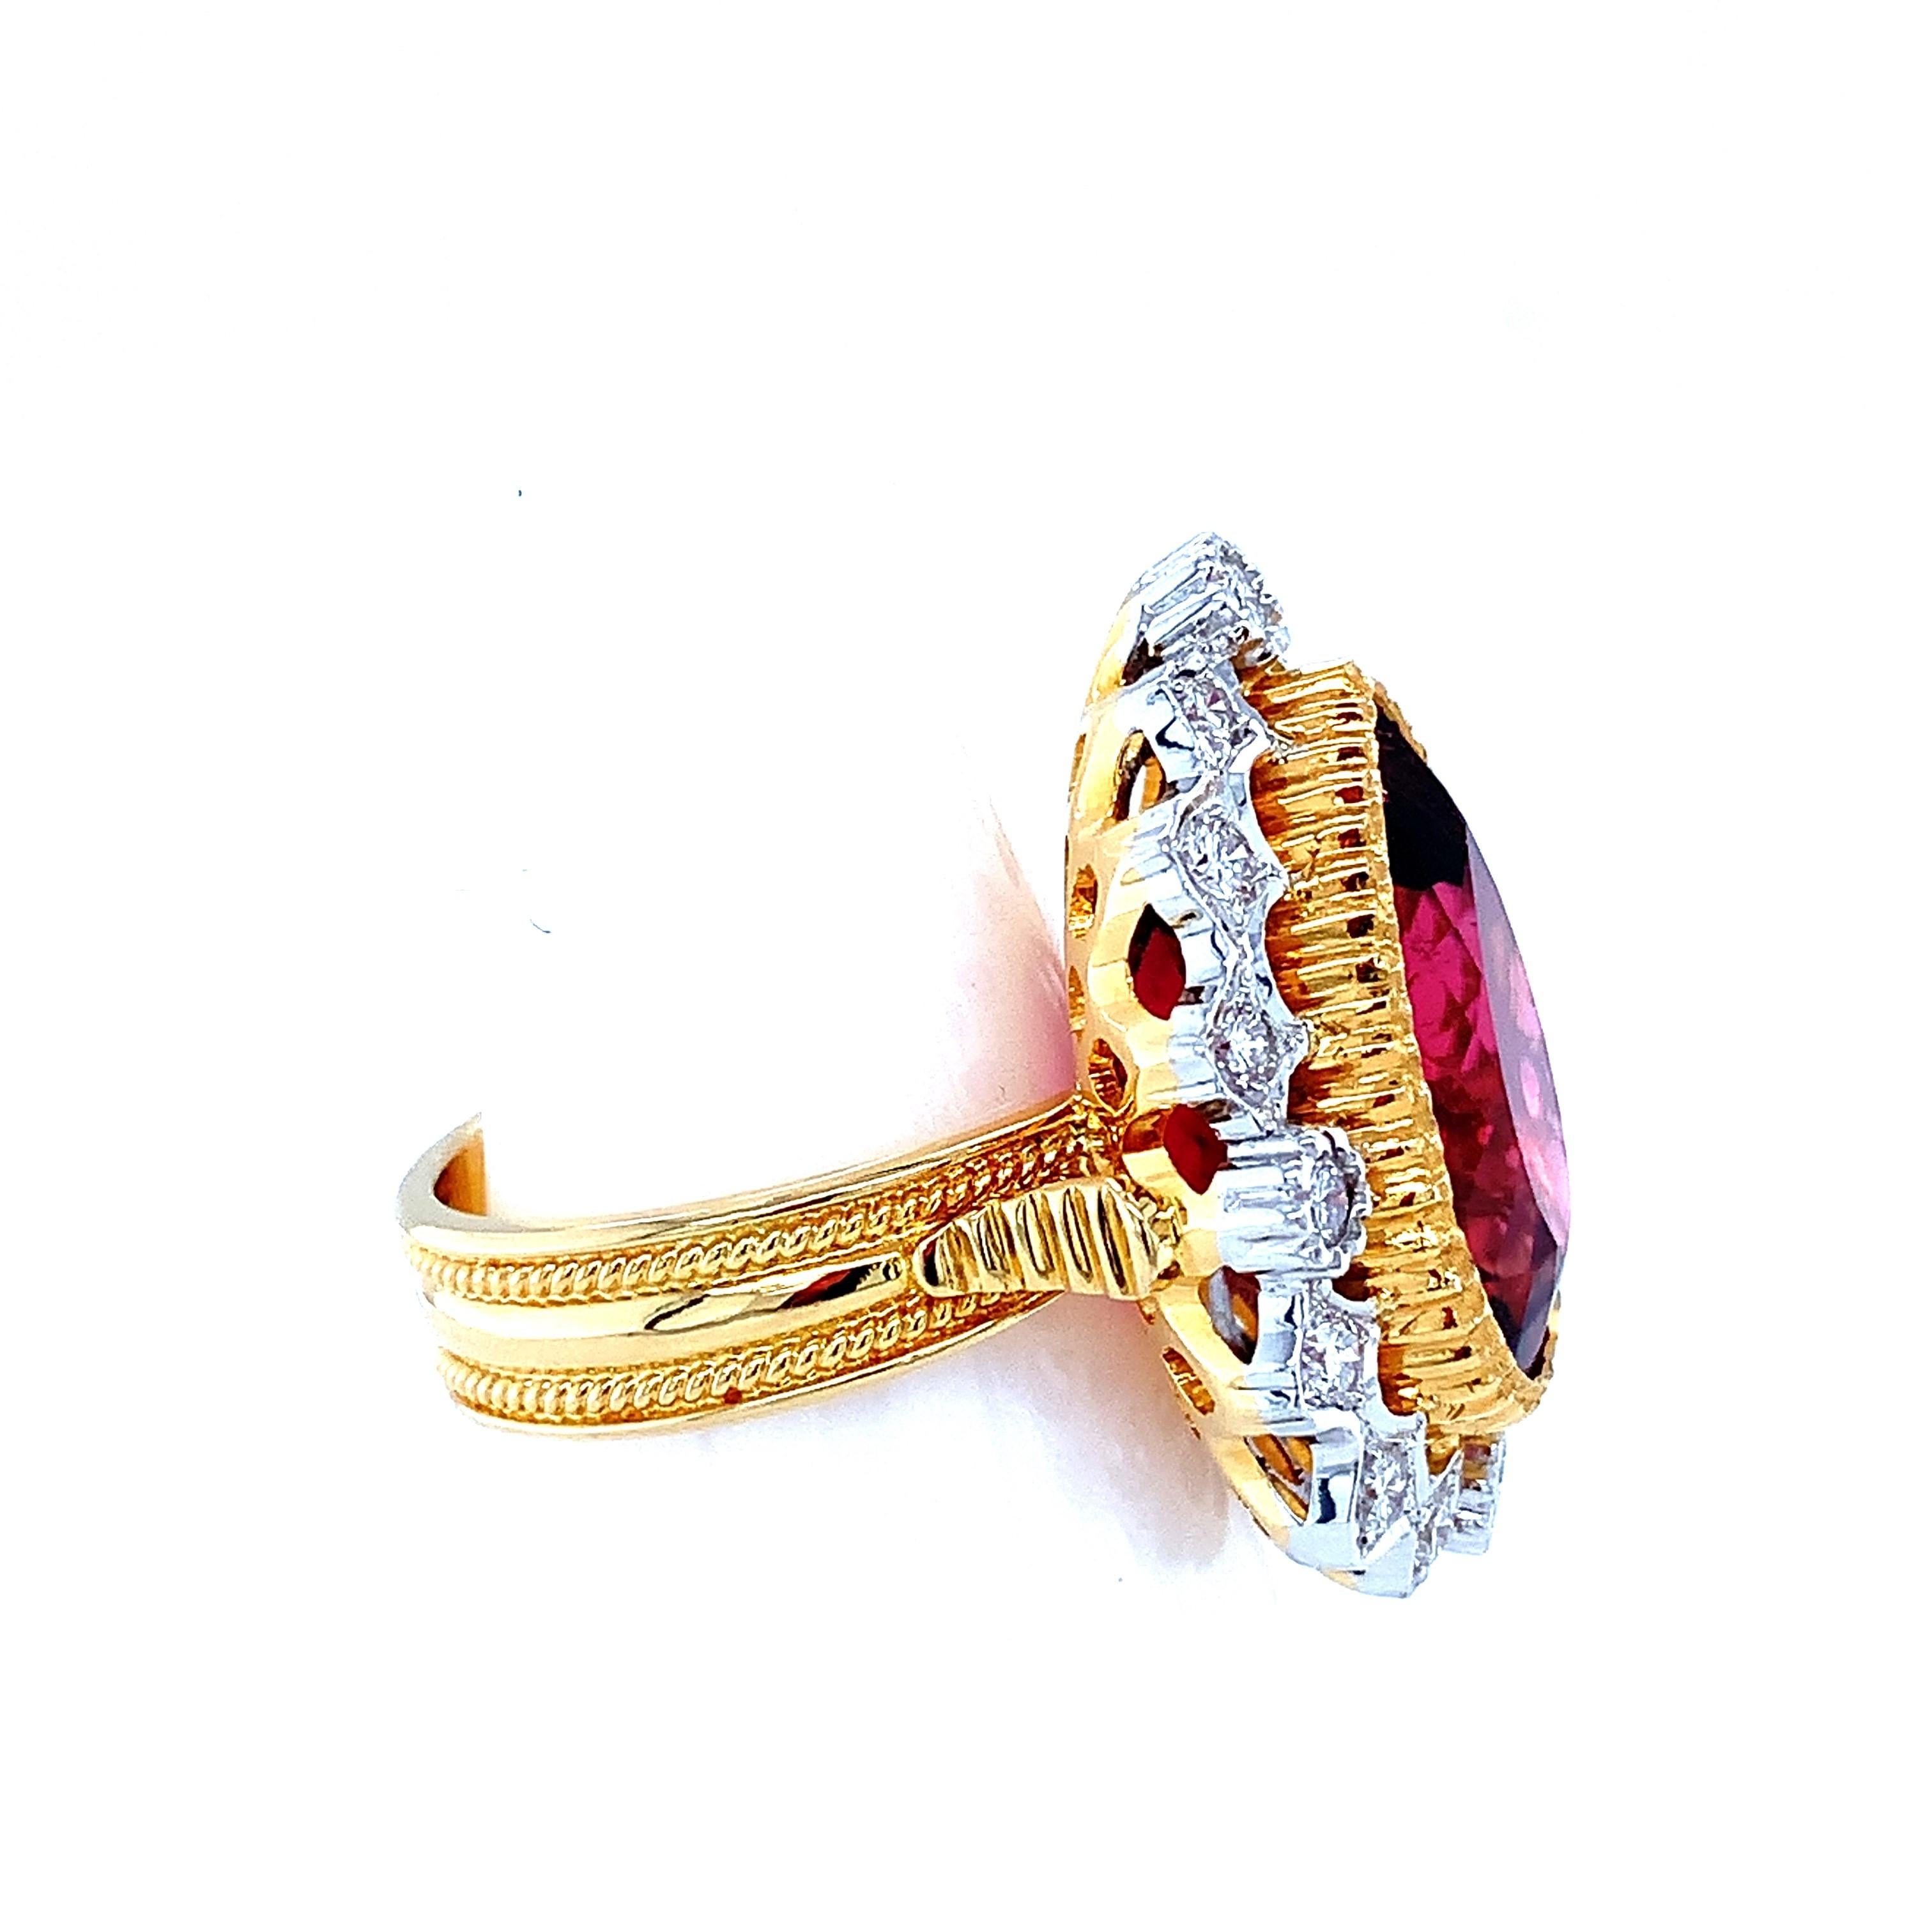 Pear Cut 14.58 Carat Rubellite Tourmaline and Diamond Cocktail Ring in White, Yellow Gold